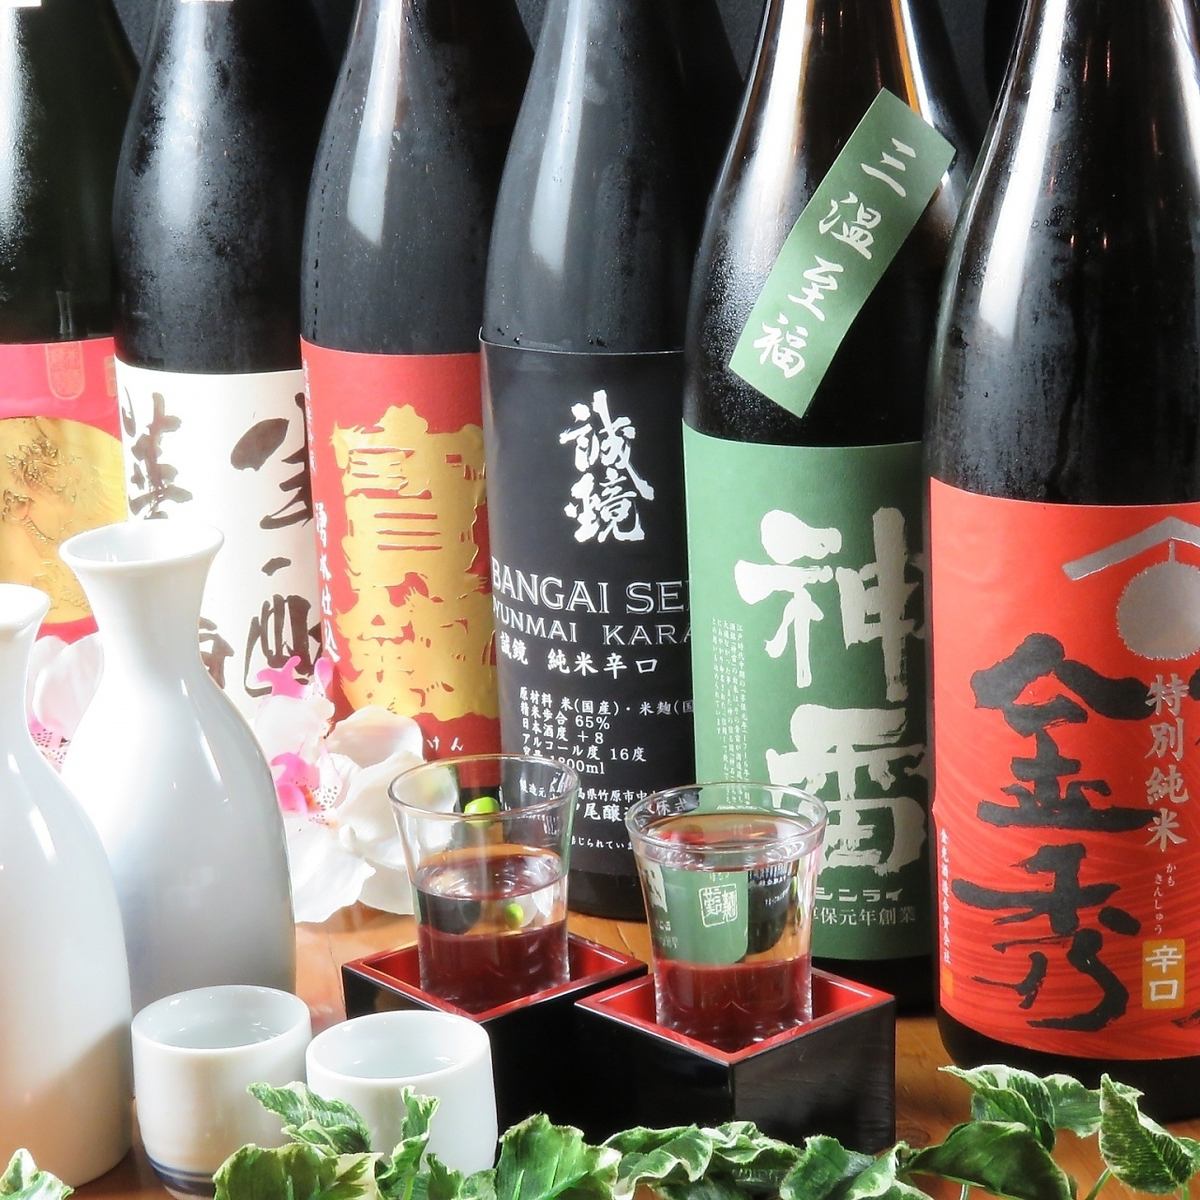 All-you-can-drink Hiroshima local sake! A course where you can taste fresh fish from the Seto Inland Sea starting at 4,000 yen